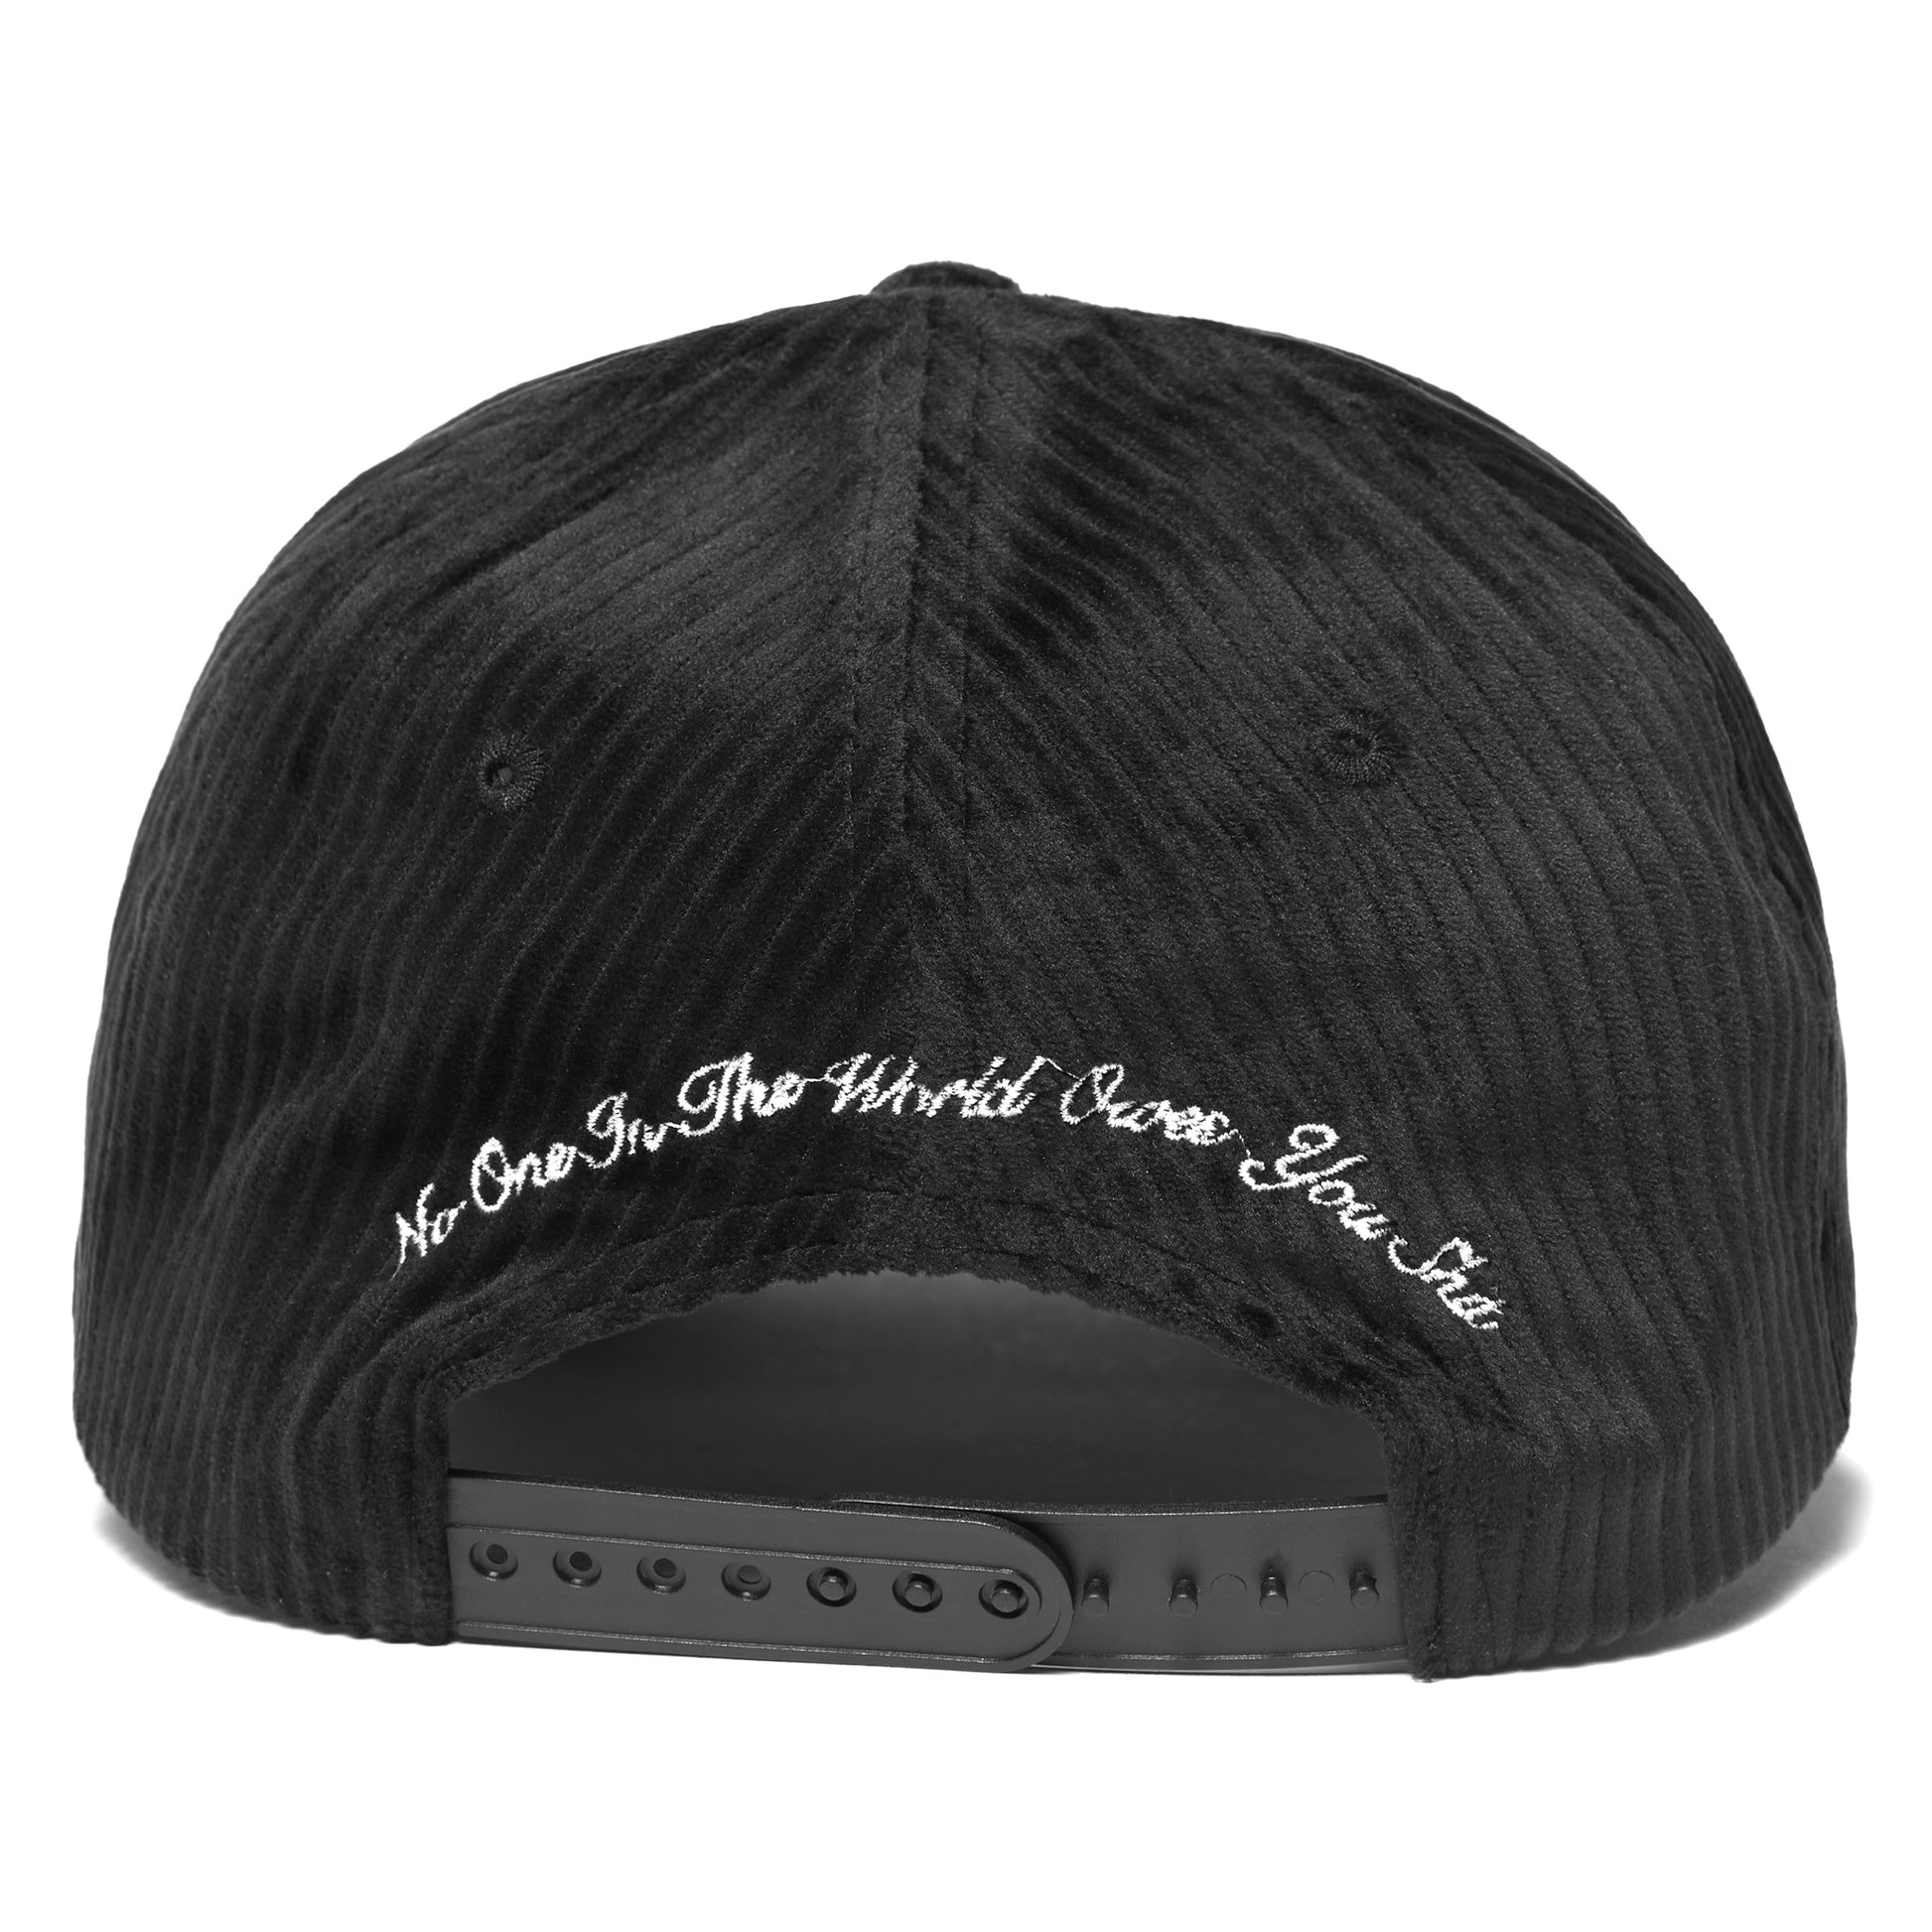 NO ONE IN THE WORLD OWES YOU SHIT CORDUROY LOGO CAP by MENACE